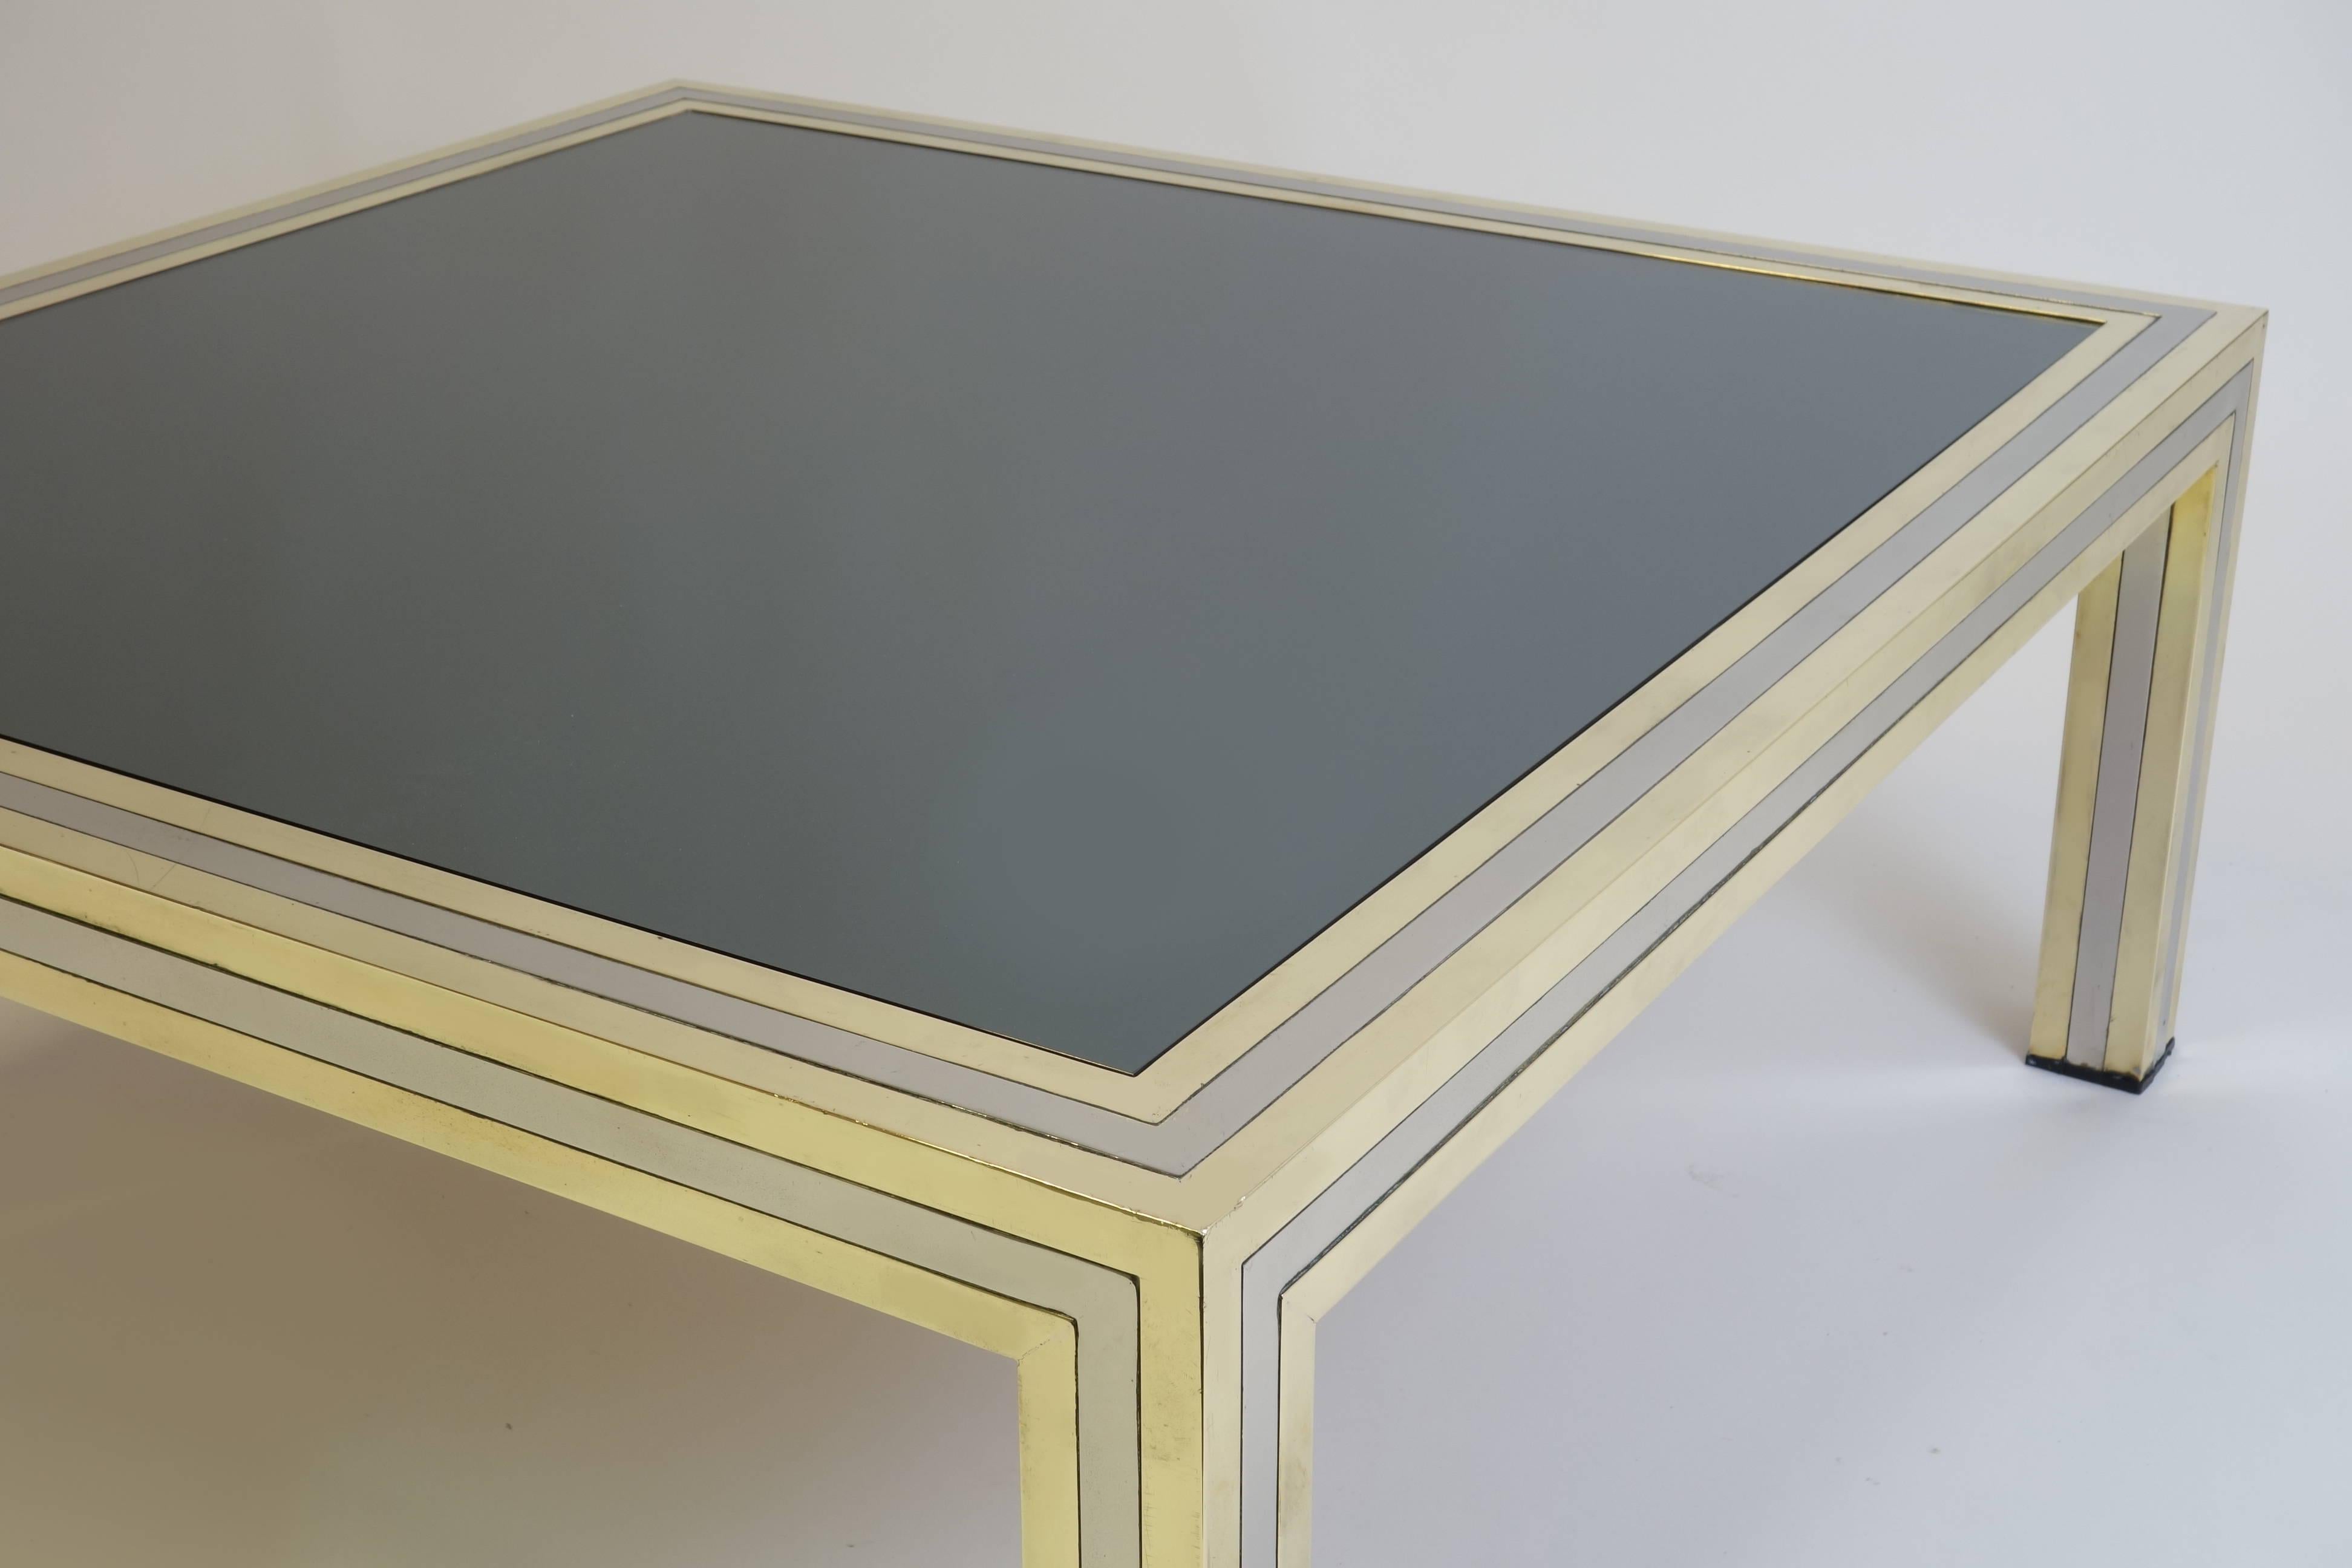 An impressive coffee table styled by the Italian designer Romeo Rega manufactured in the mid-1970s. The frame made of nickel-plated metal and brass carries its top of tinted mirror glass. Its gold or silver sequence as an expressive statement